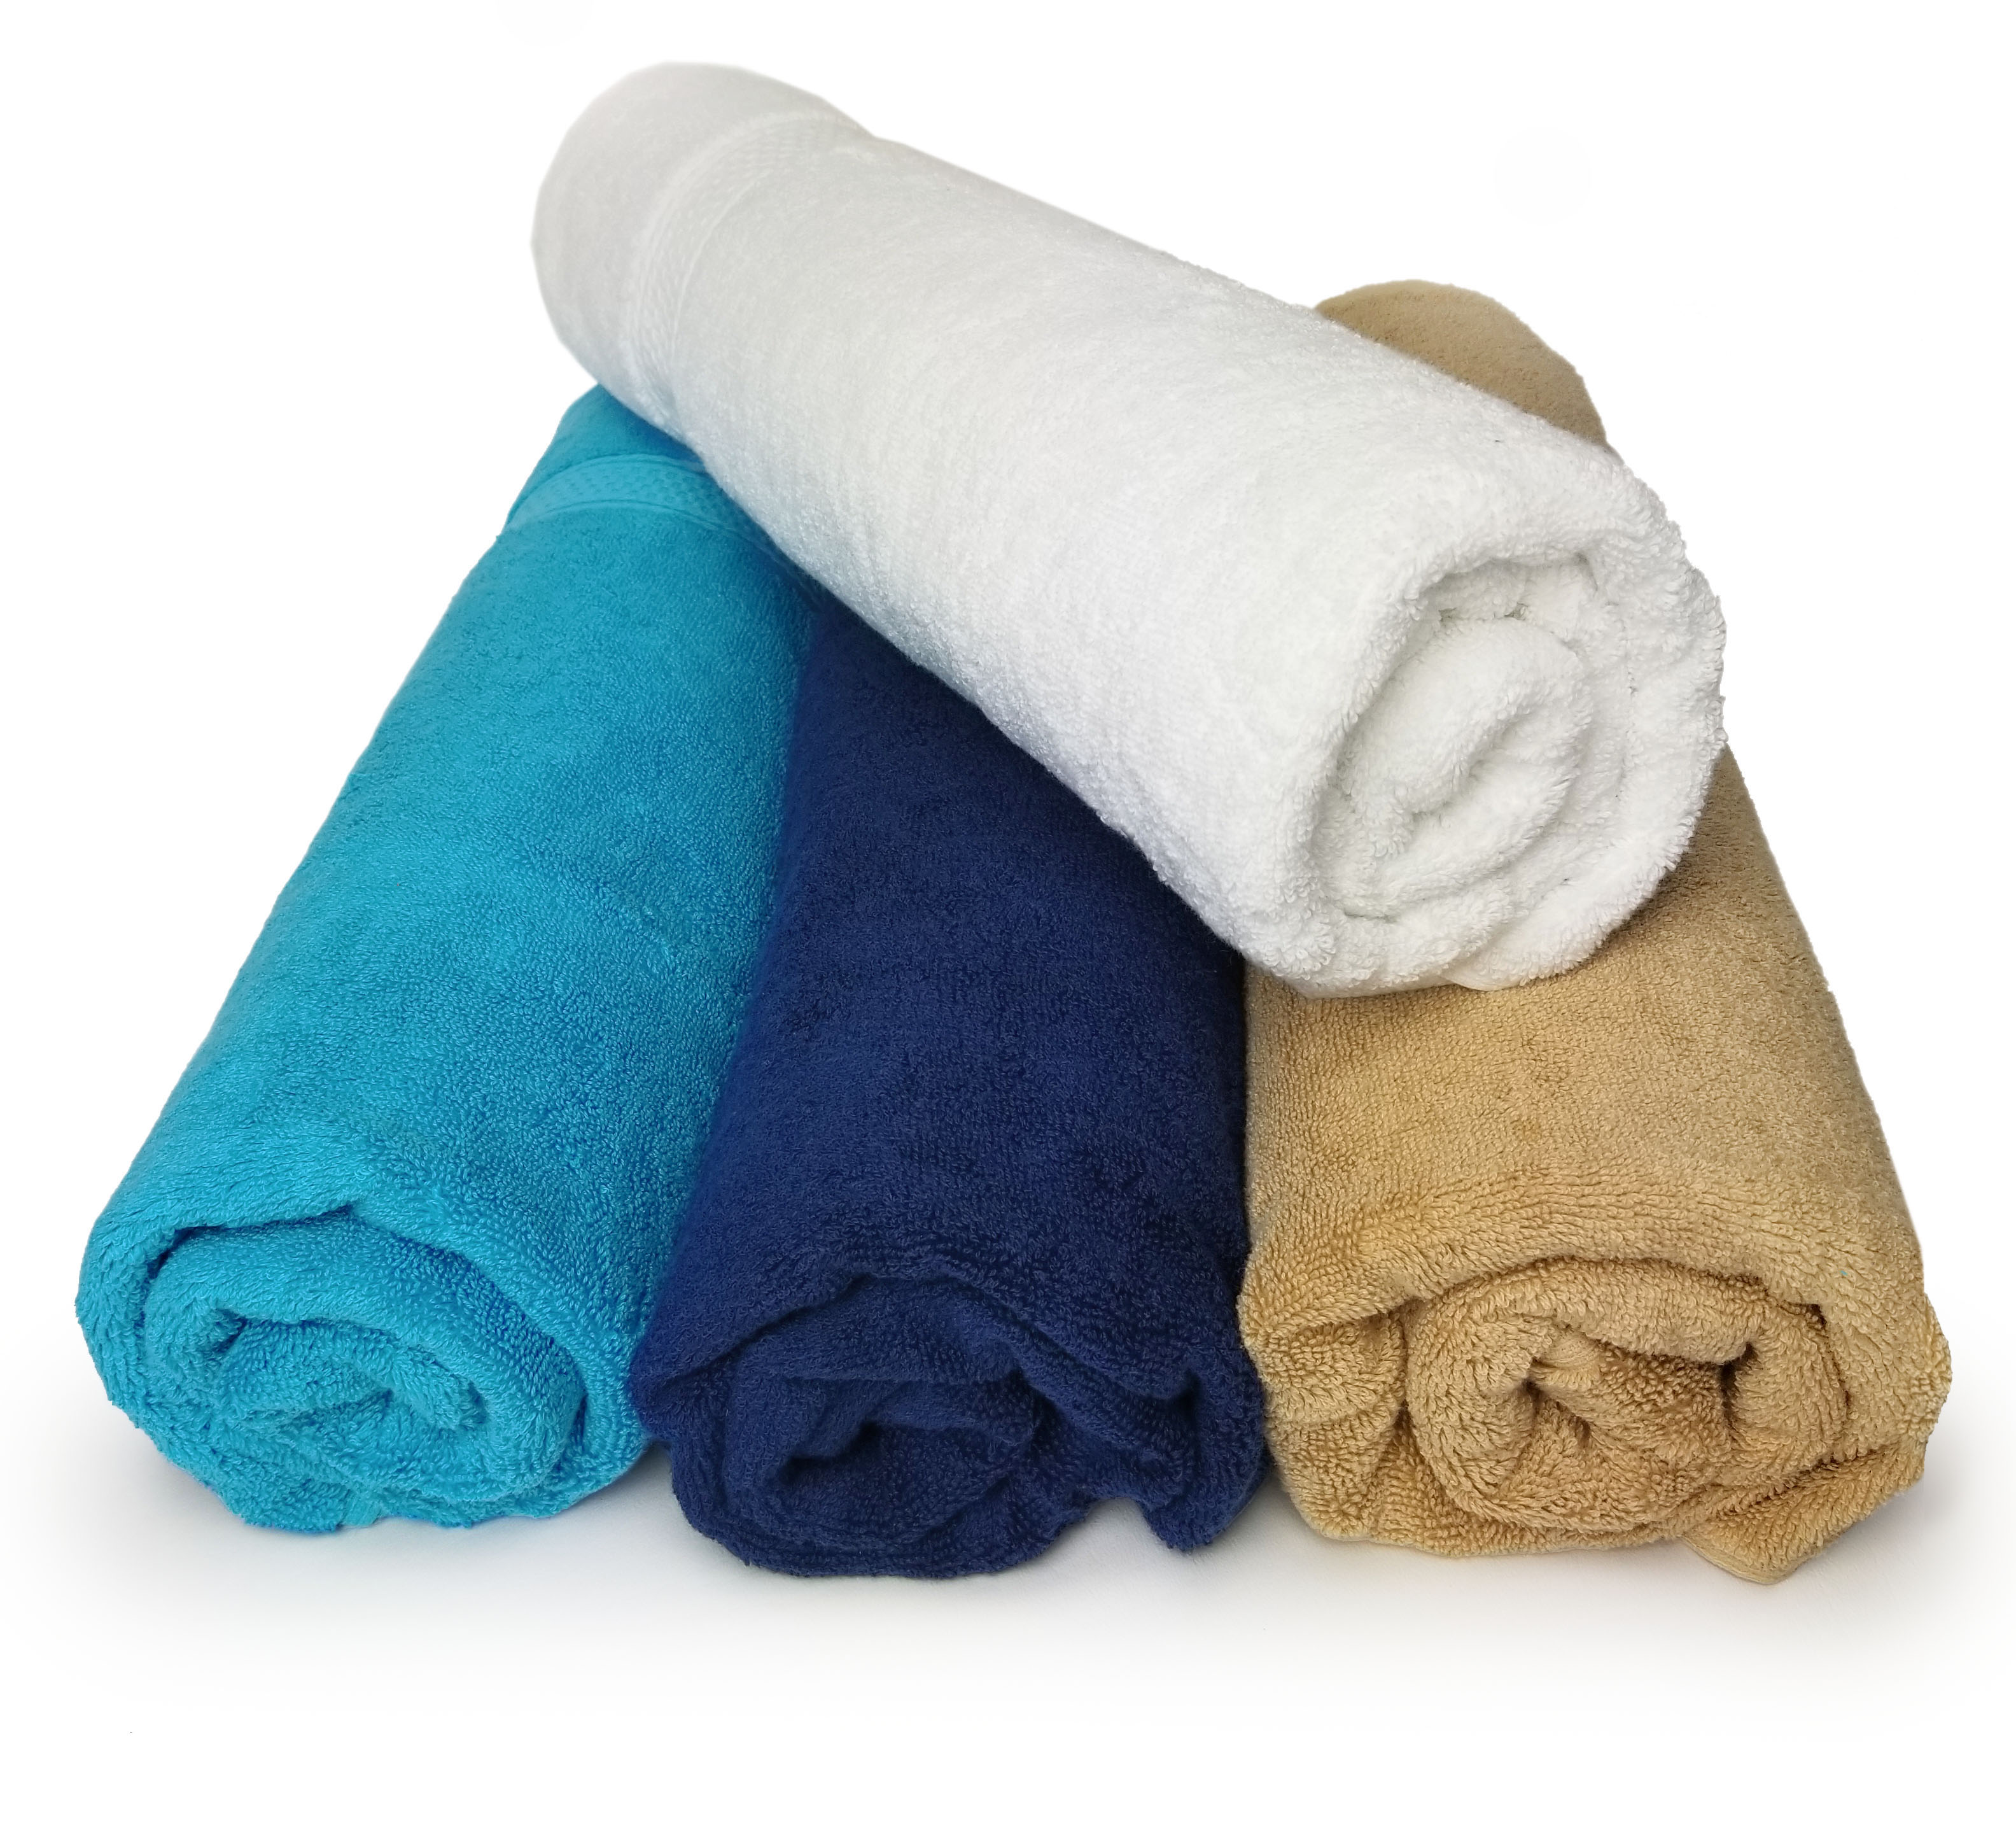 EMBROIDERED  24x48 Bath Towels by Royal Comfort 10.8 Lbs/Dz  Woven   RING SPUN COTTON 